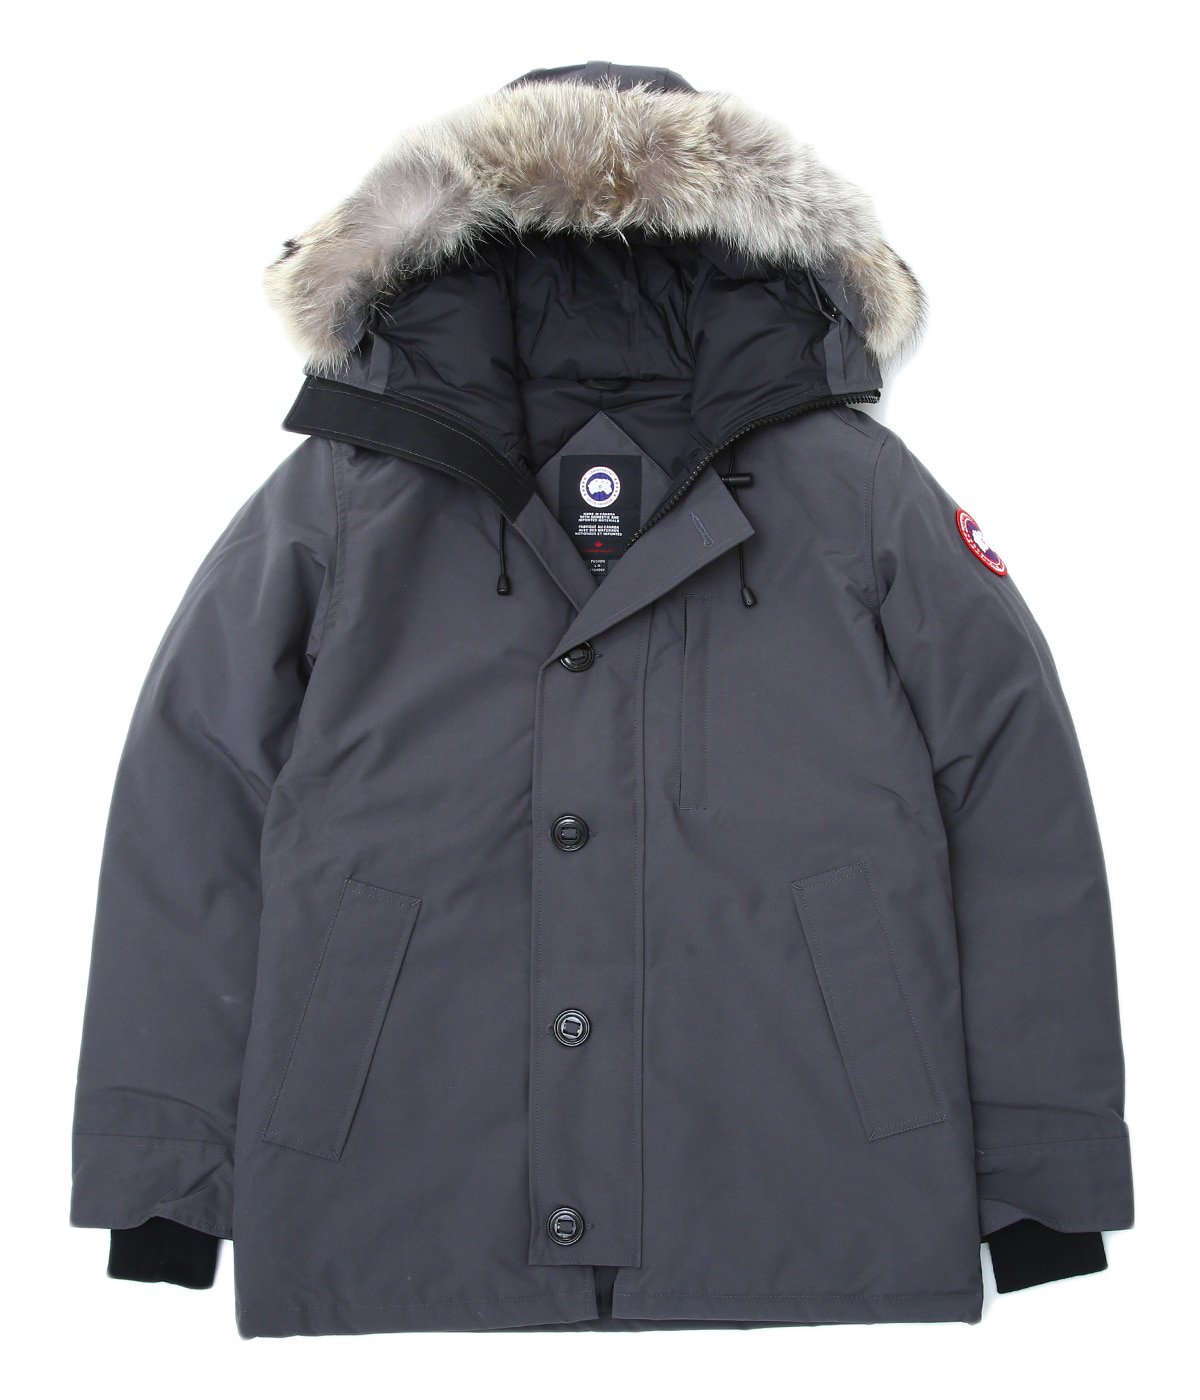 Chateau Parka Fusion Fit Heritage | CANADA GOOSE(カナダグース